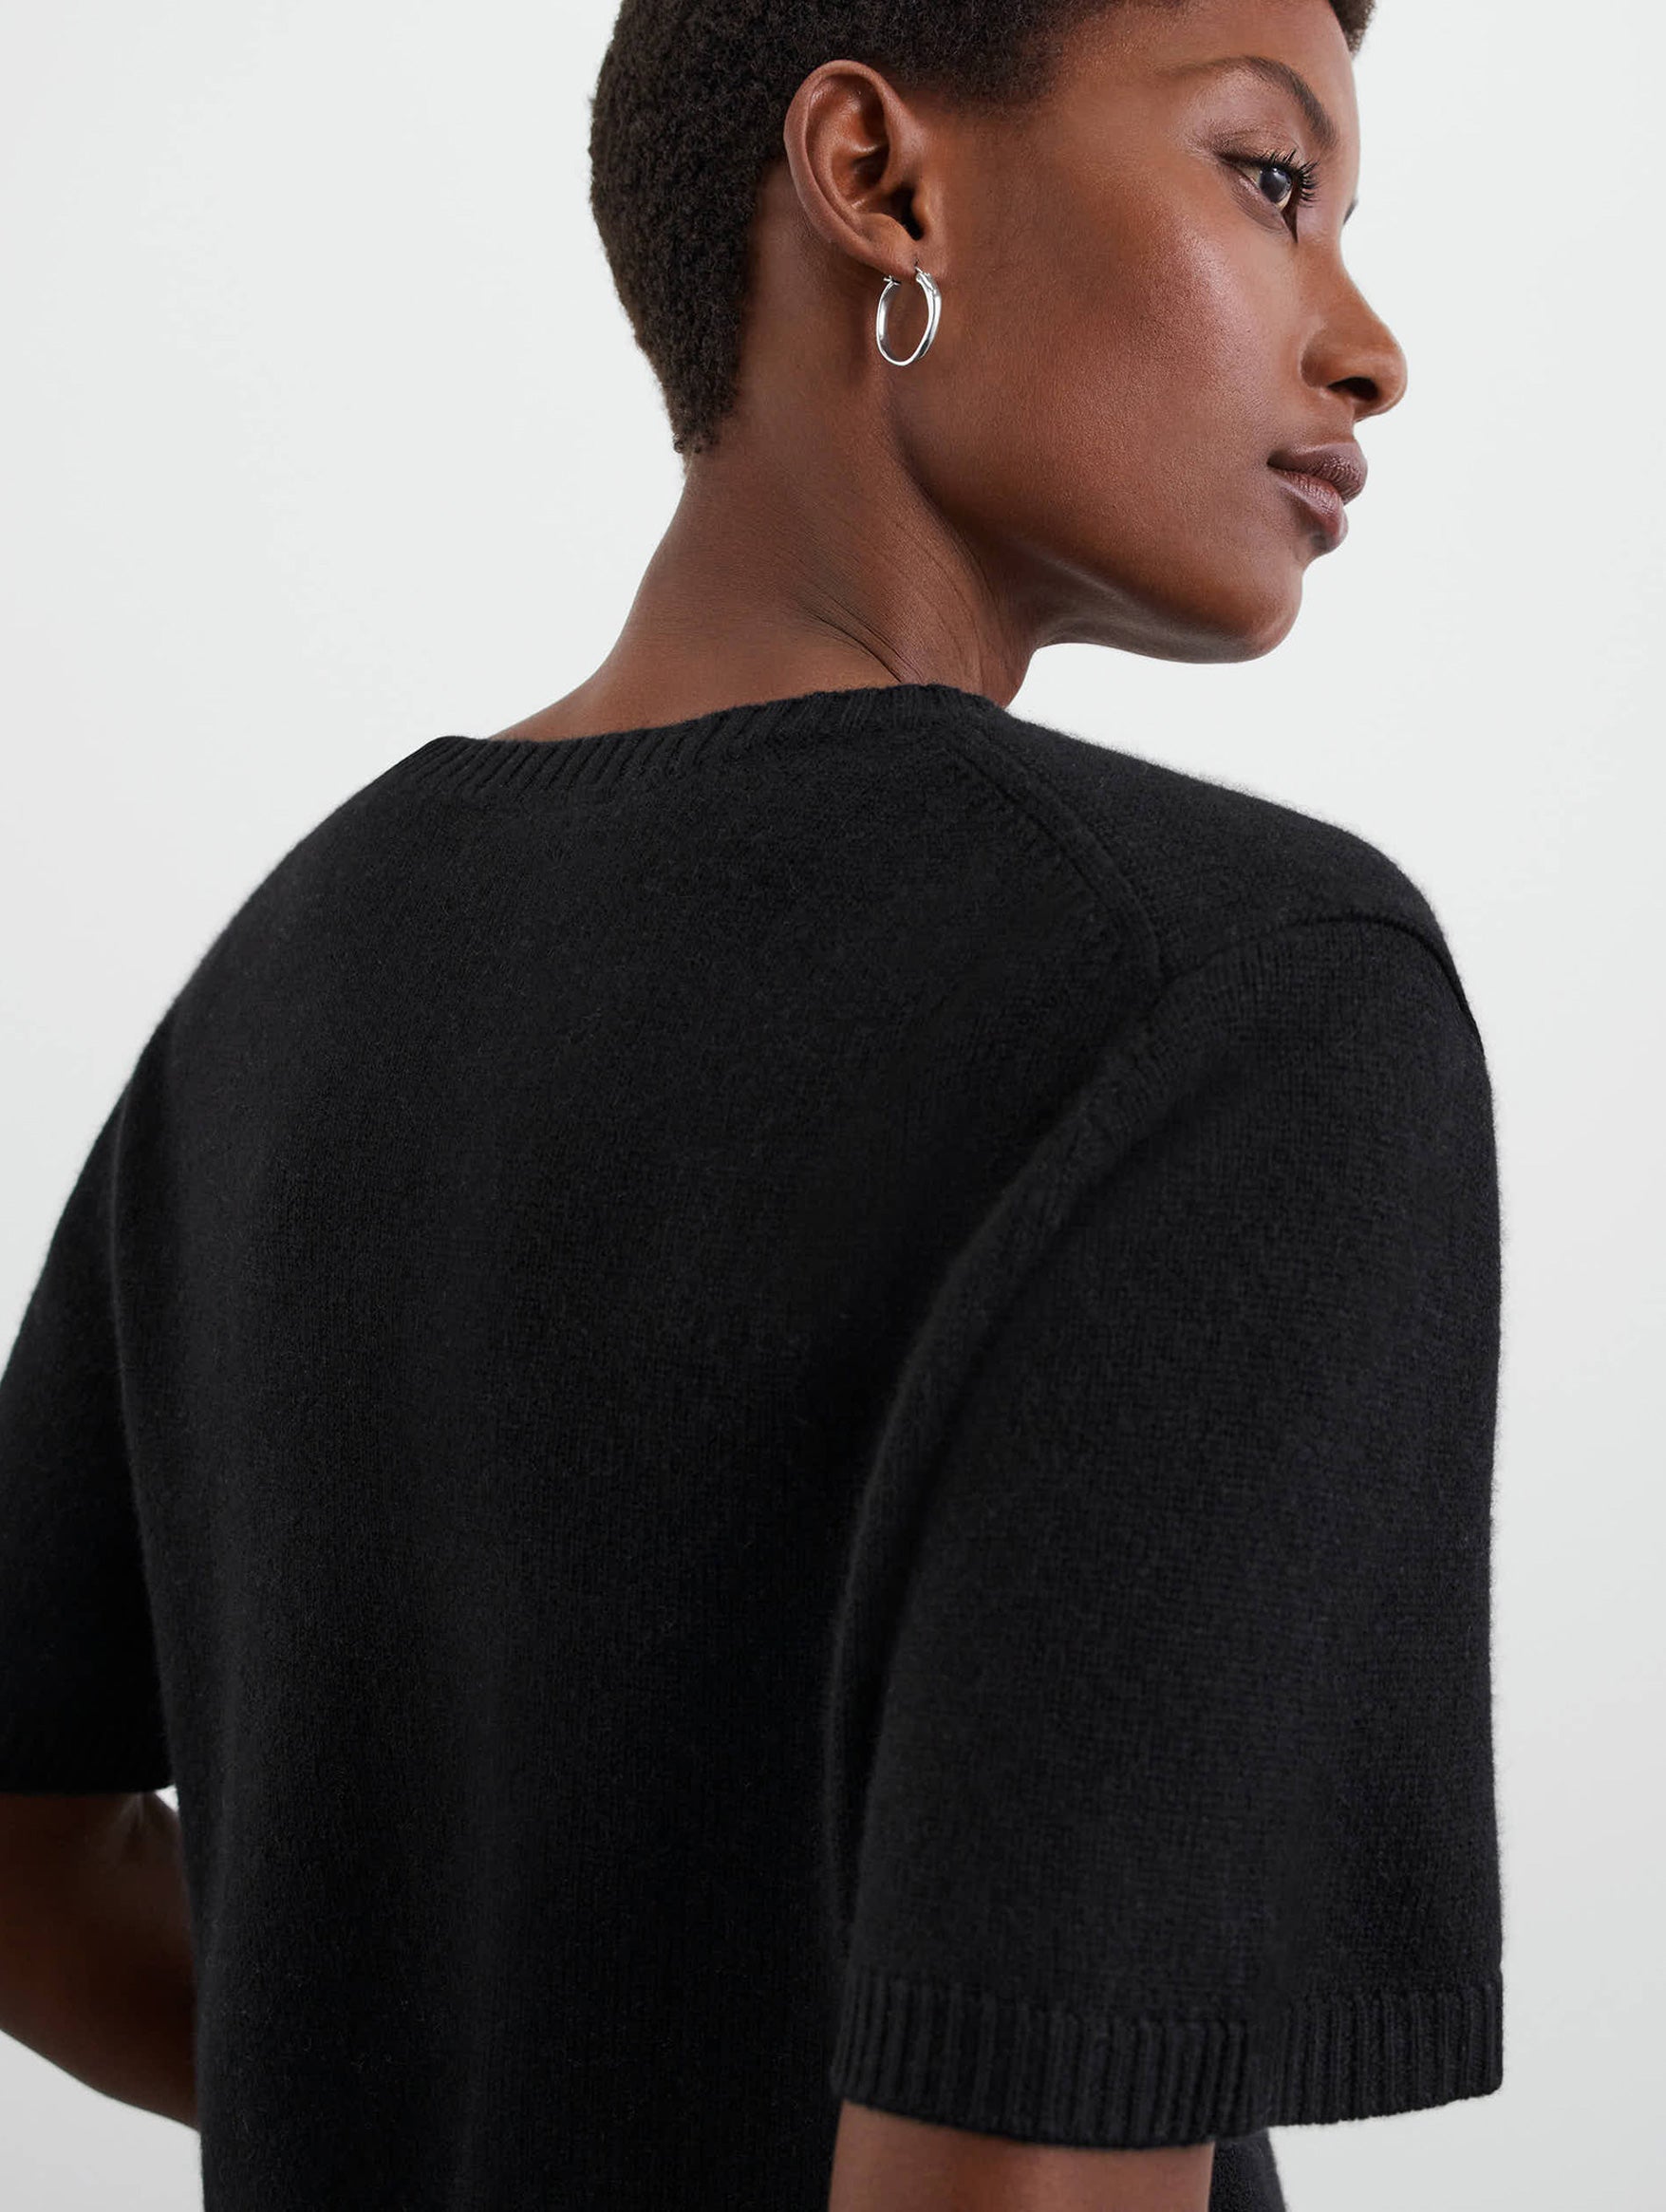 Chunky Cashmere T-Shirt in Black